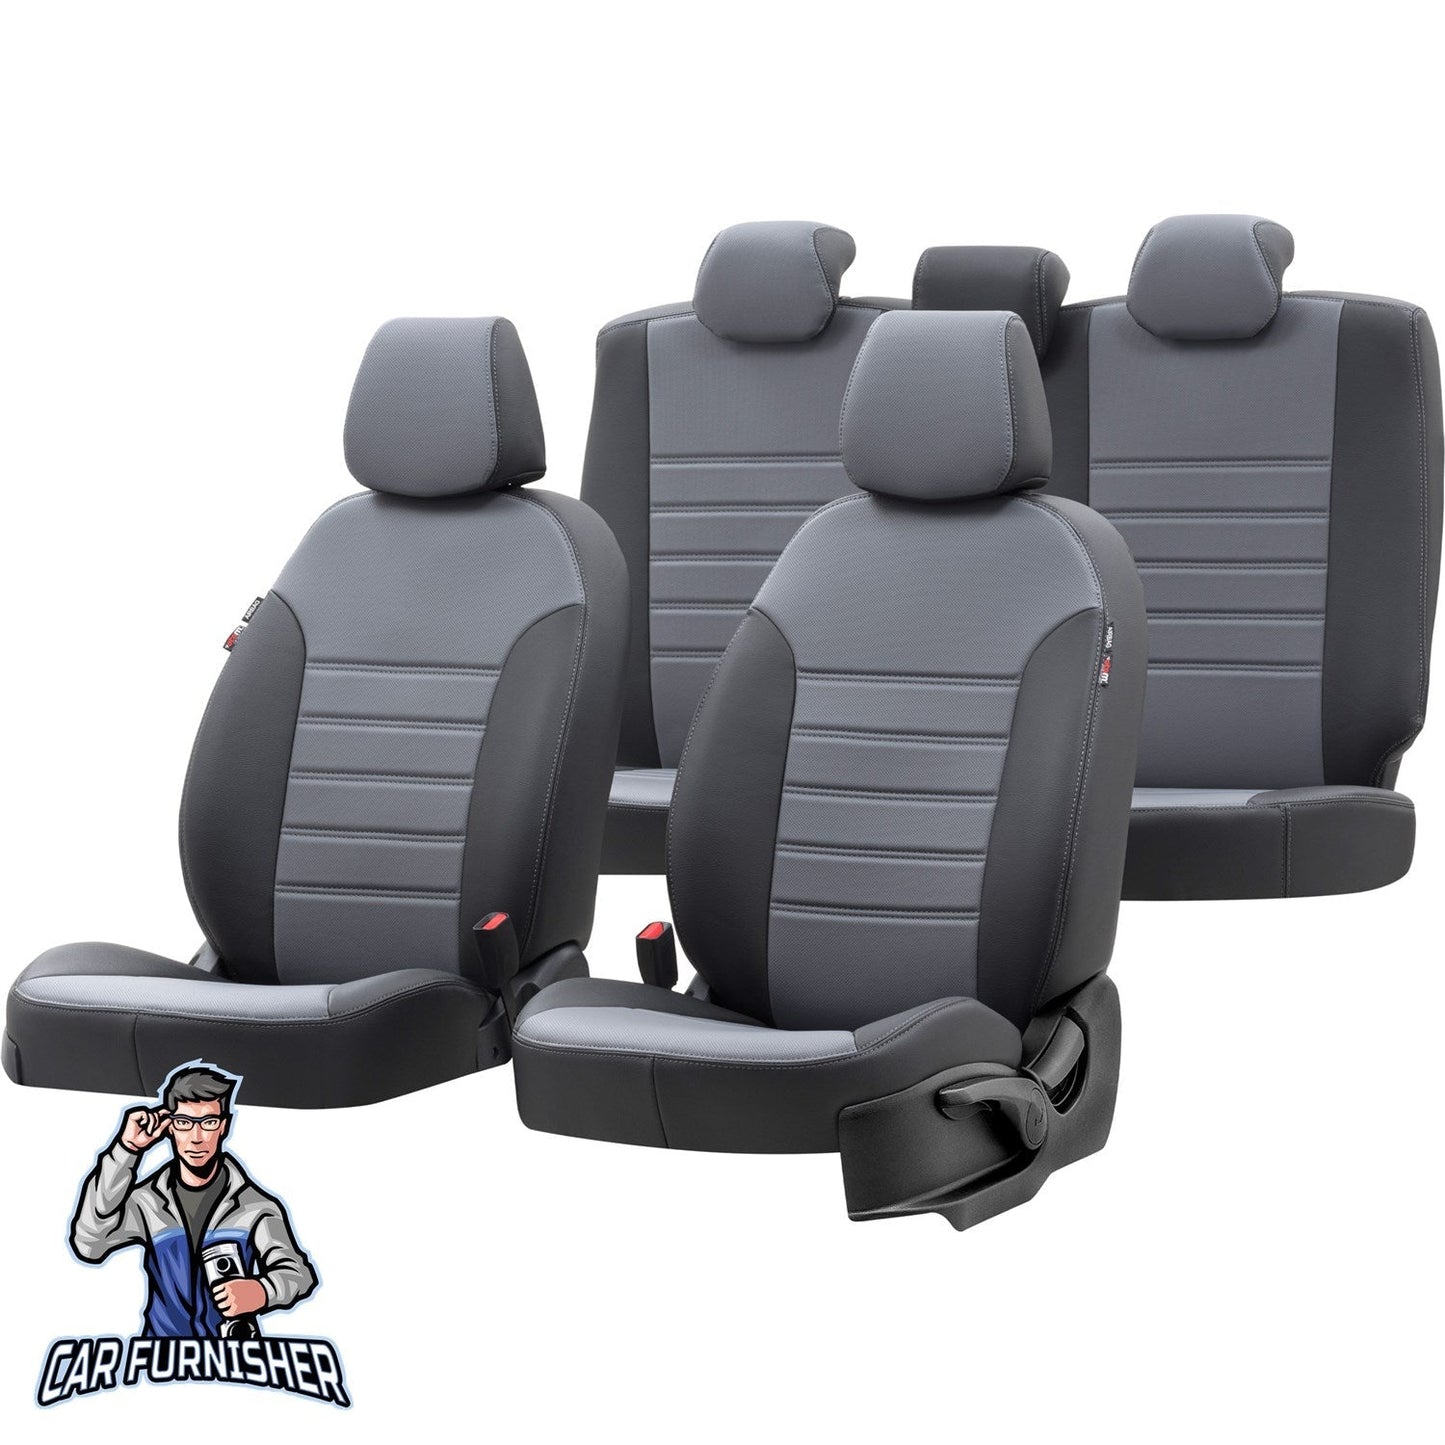 Peugeot 207 Seat Covers Istanbul Leather Design Smoked Black Leather